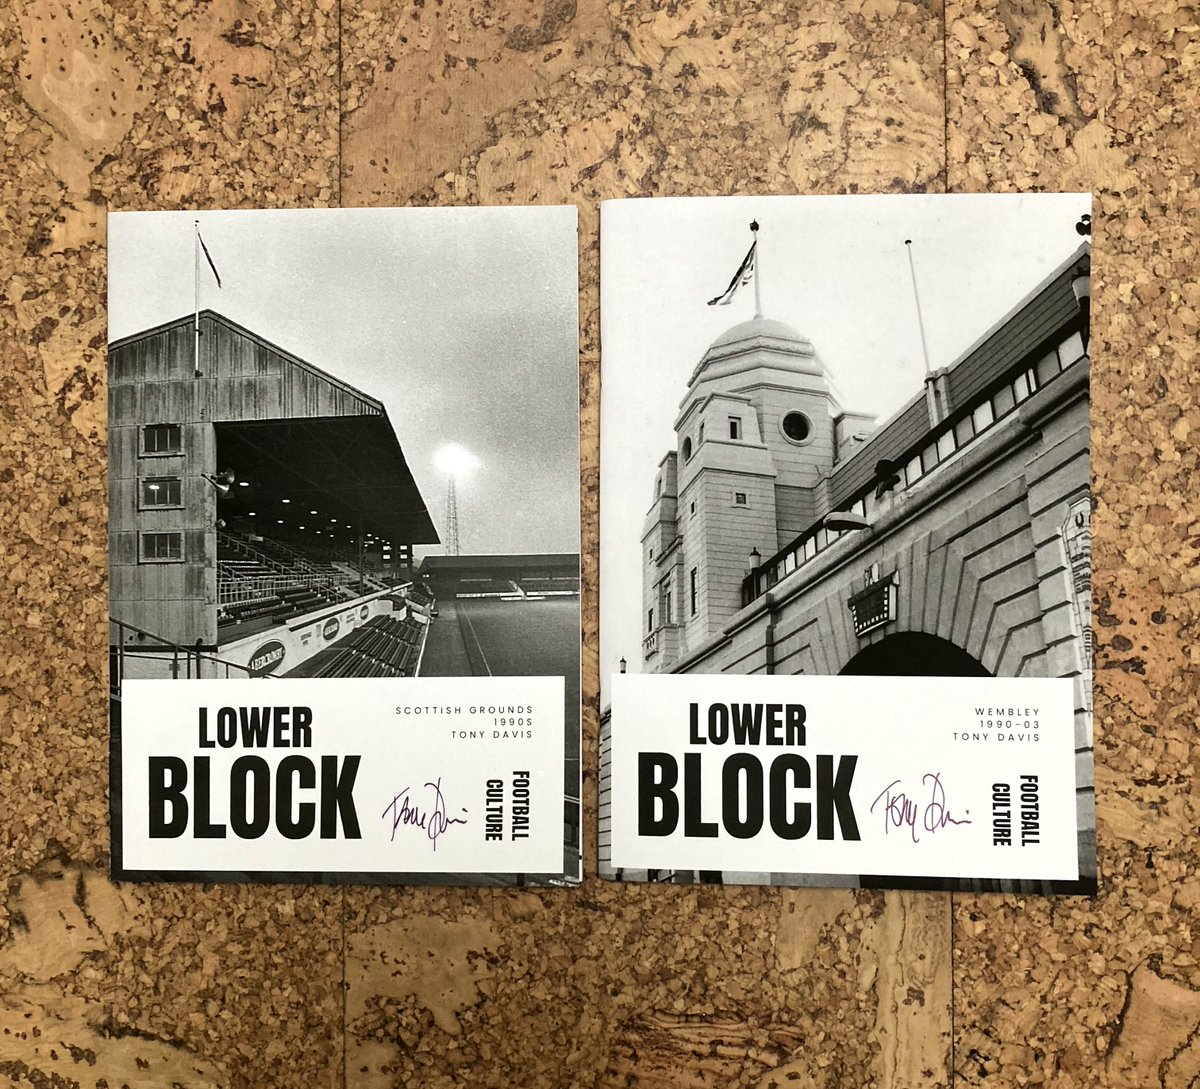 **GIVEAWAY** Win a copy Scottish Grounds 1990s AND Wembley 1990-03 singed by the man himself, @DavisArchive!! LIKE & RETWEET this post & FOLLOW @LowerBlock & @DavisArchive! Winner announced next FRIDAY! #footballculture #photography #football